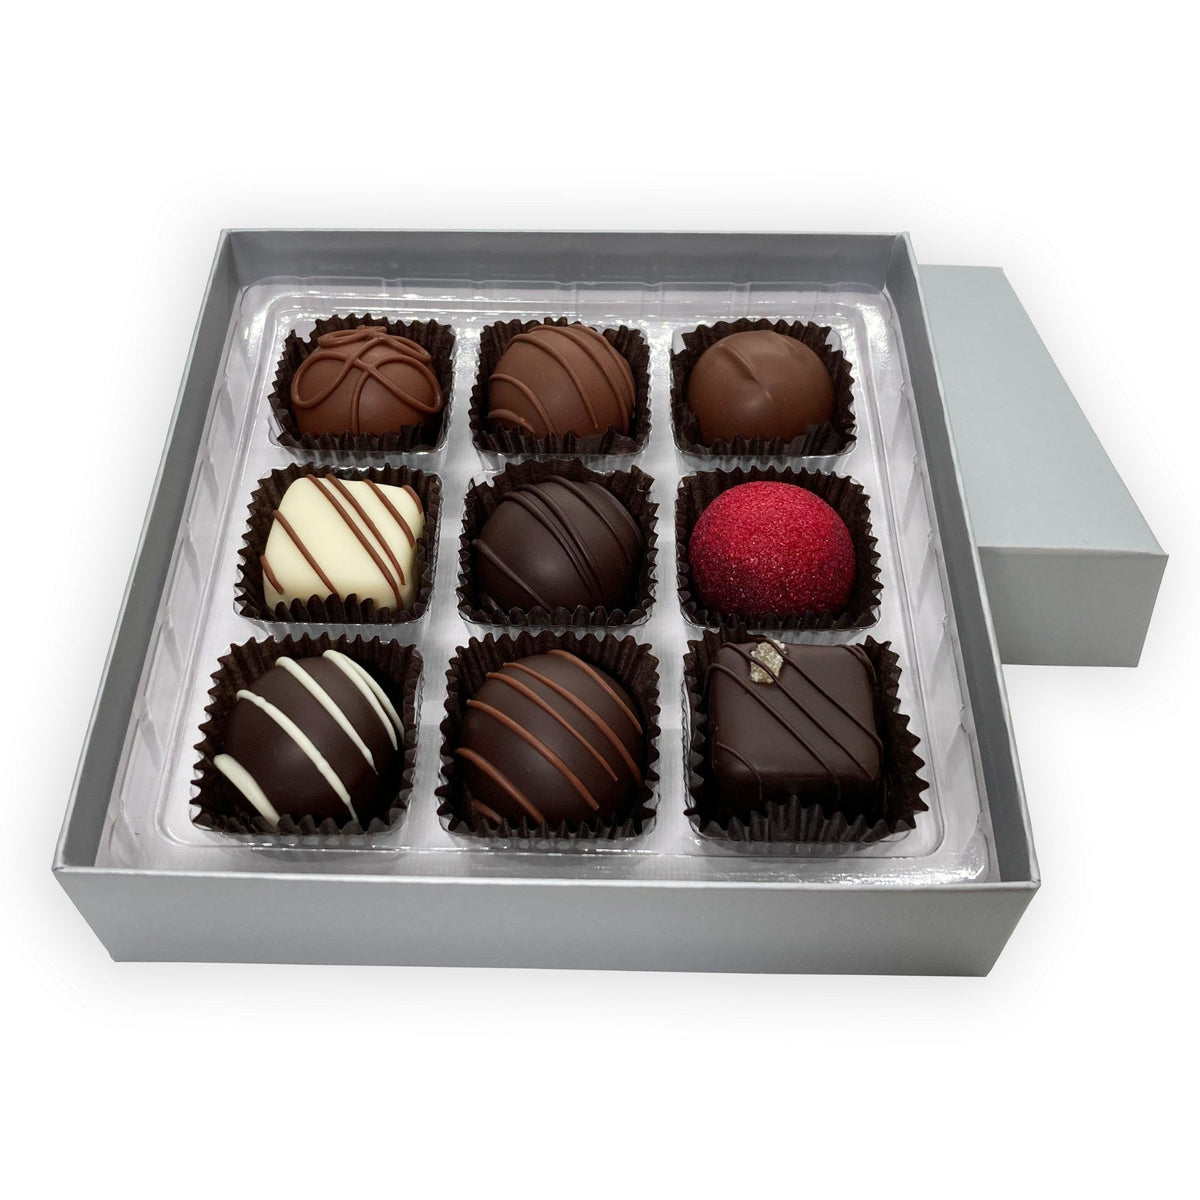 Dilettante Chocolates Individually Crafted Chocolate Truffle Gift Box Featuring Nine Different Truffle Flavors